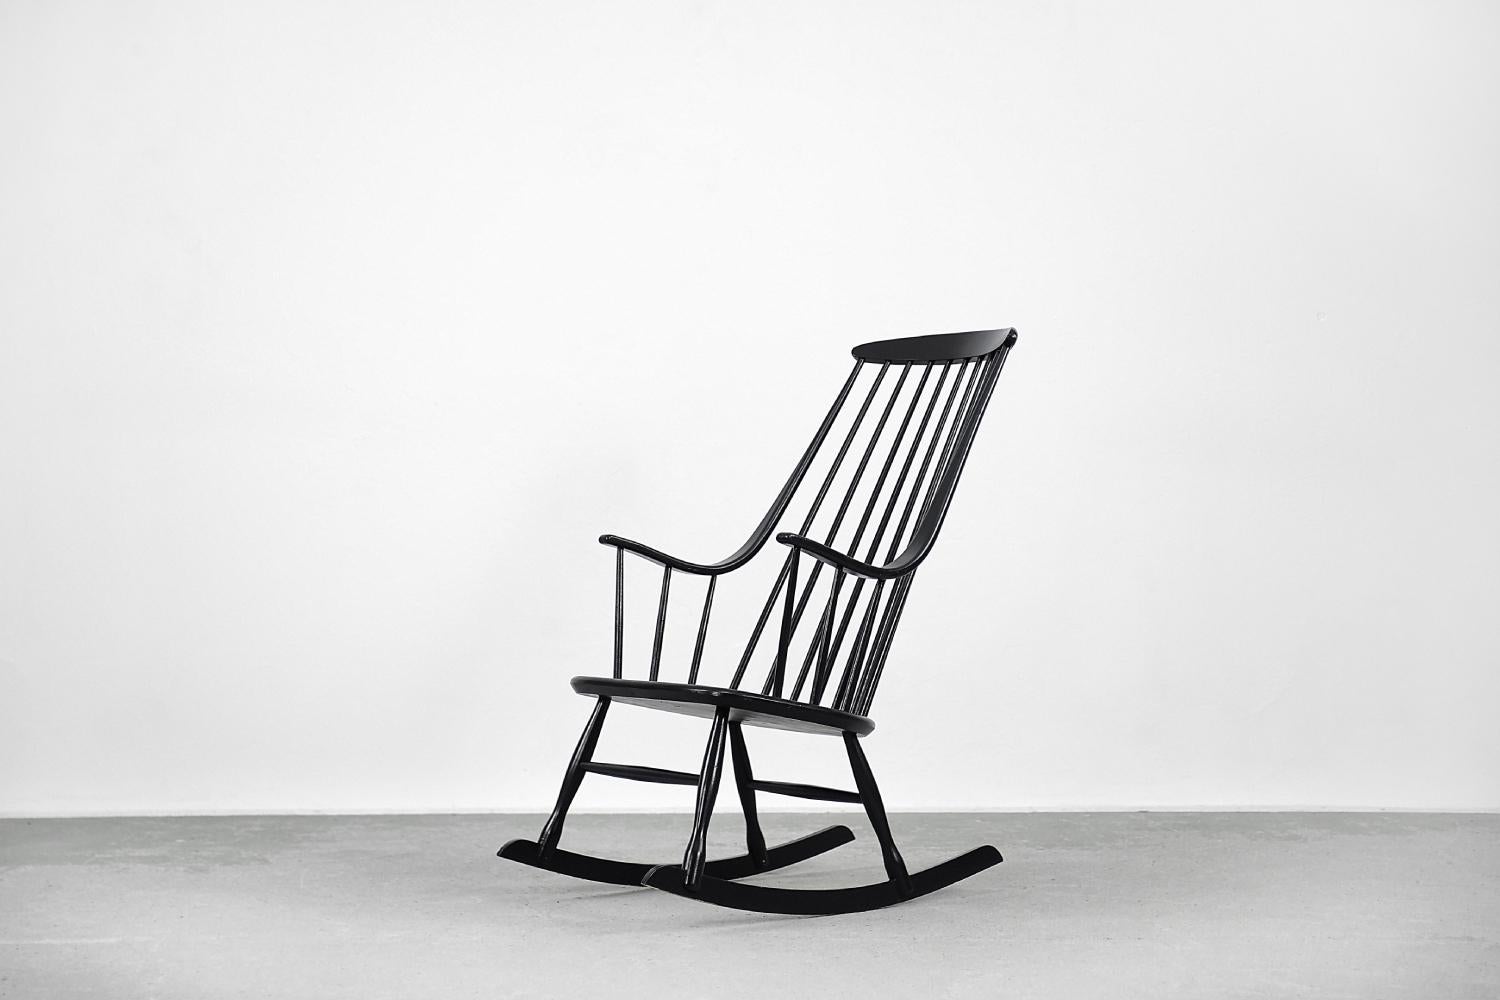 This Grandessa rocking chair was designed by Lena Larsson for the Swedish Nesto manufacture during the 1960s. The armchair is made of beech wood. It has been finished with black varnish. The high backrest seamlessly transforms into the armrests. The